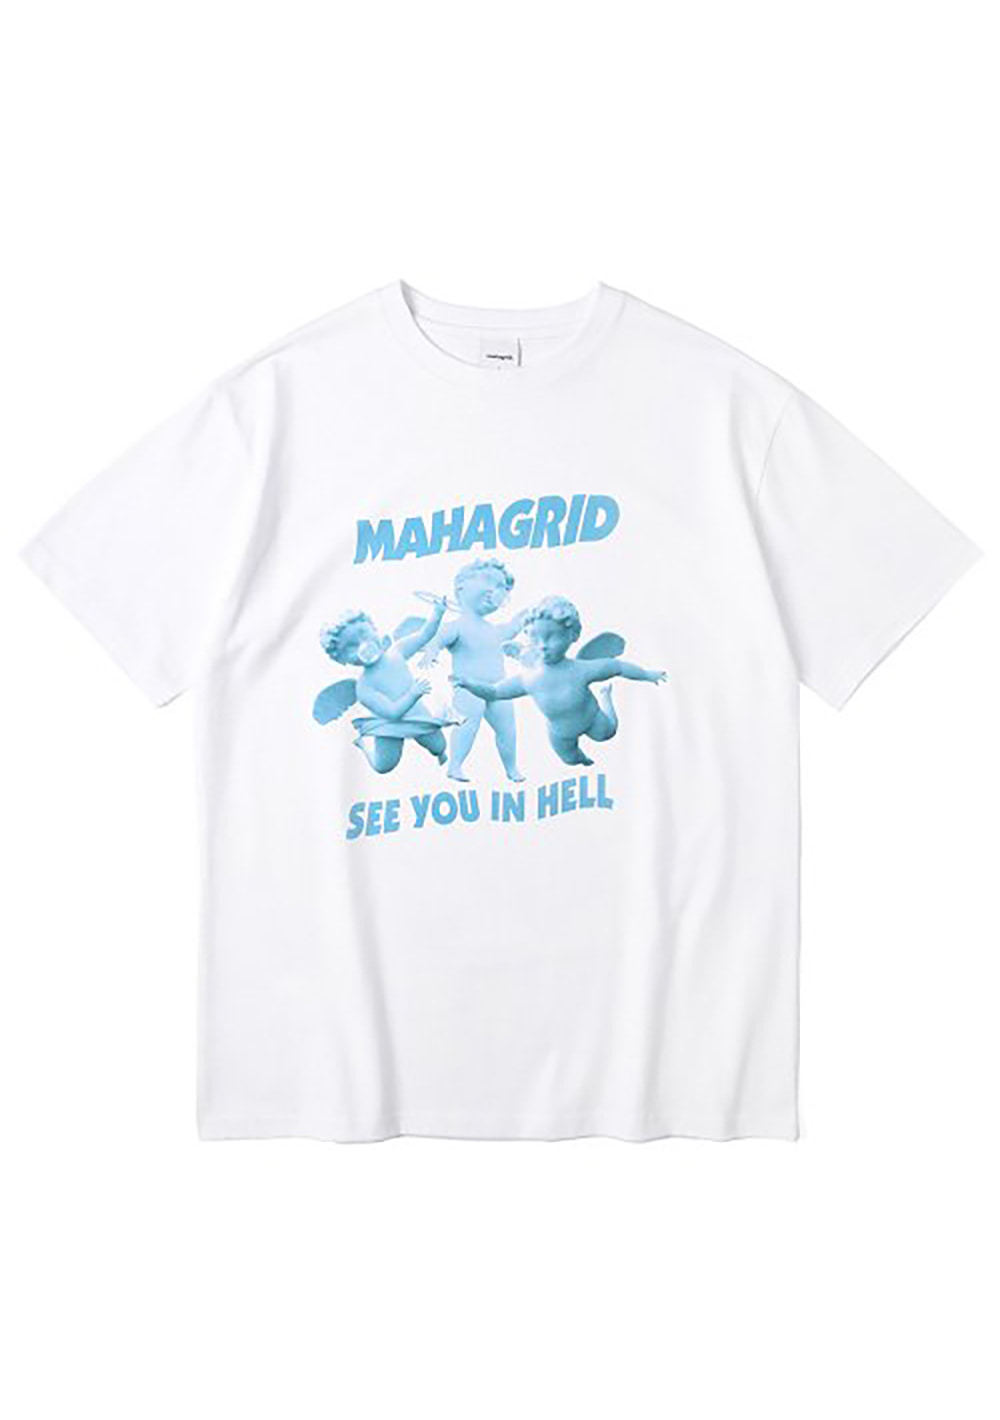 MH_SEE YOU IN HELL TEE